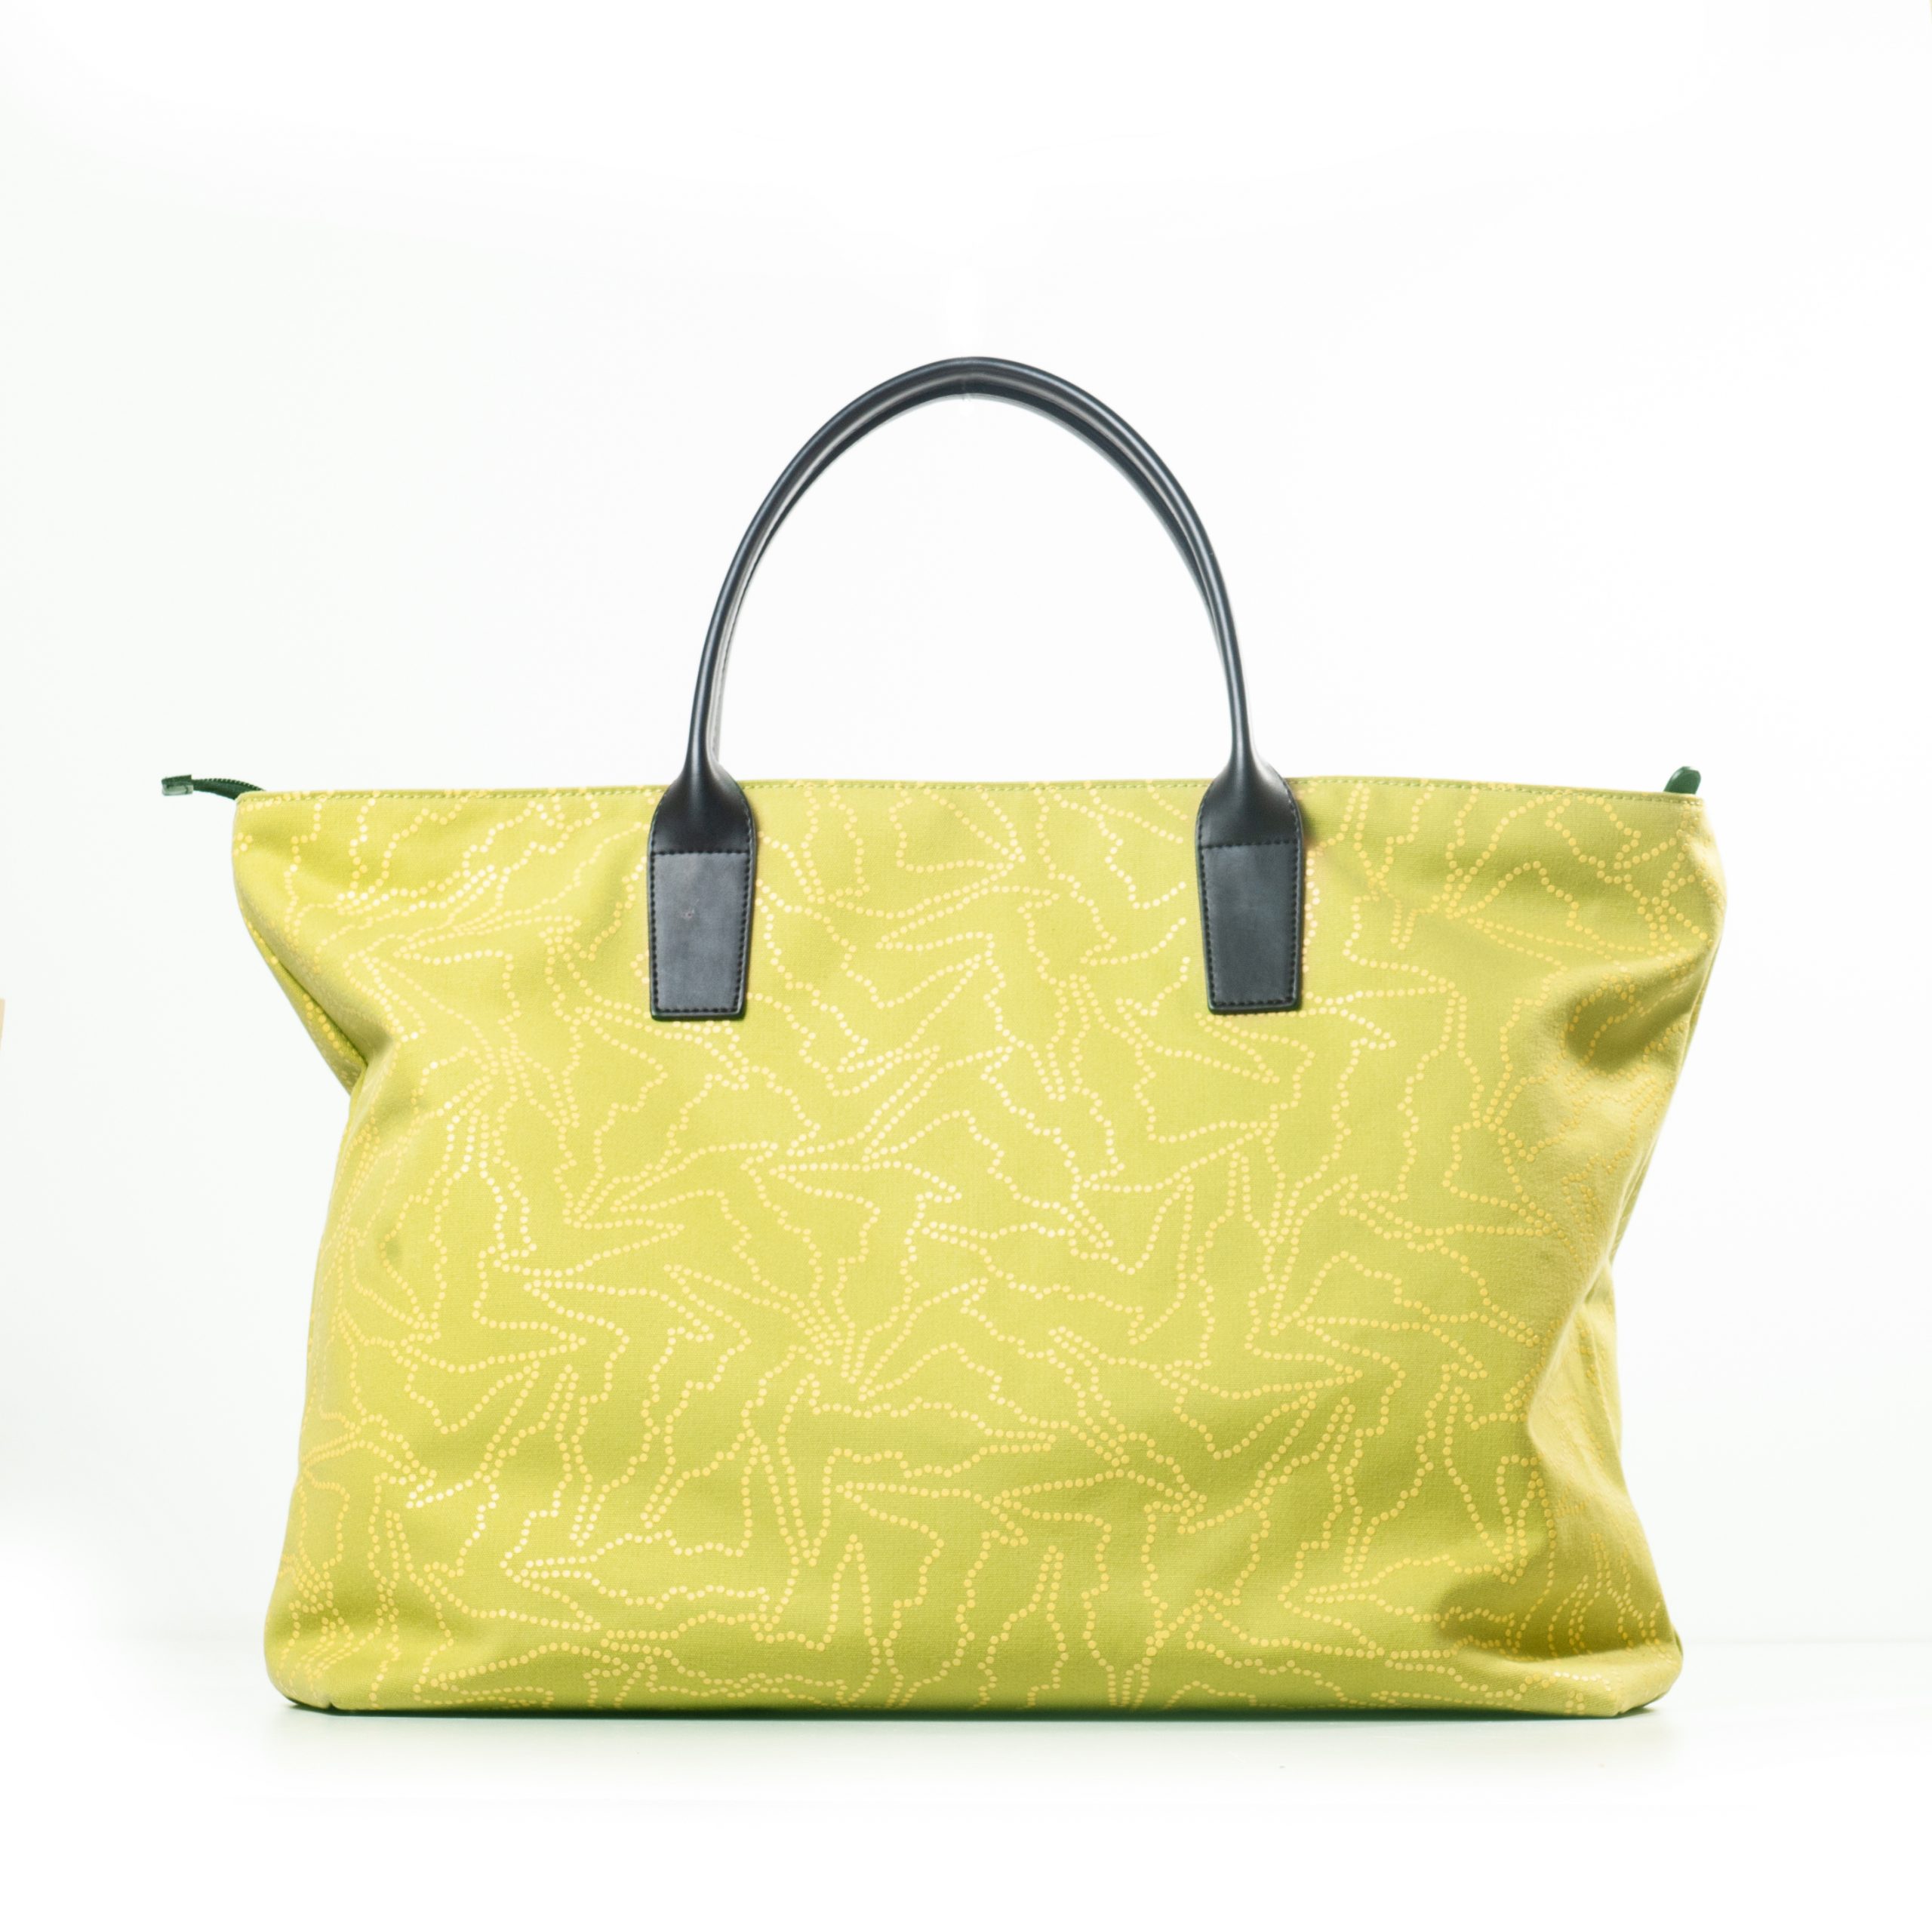 Deviate Peddling sweet taste Trussardi borsa shopping verde – il tuo bags and shoes store